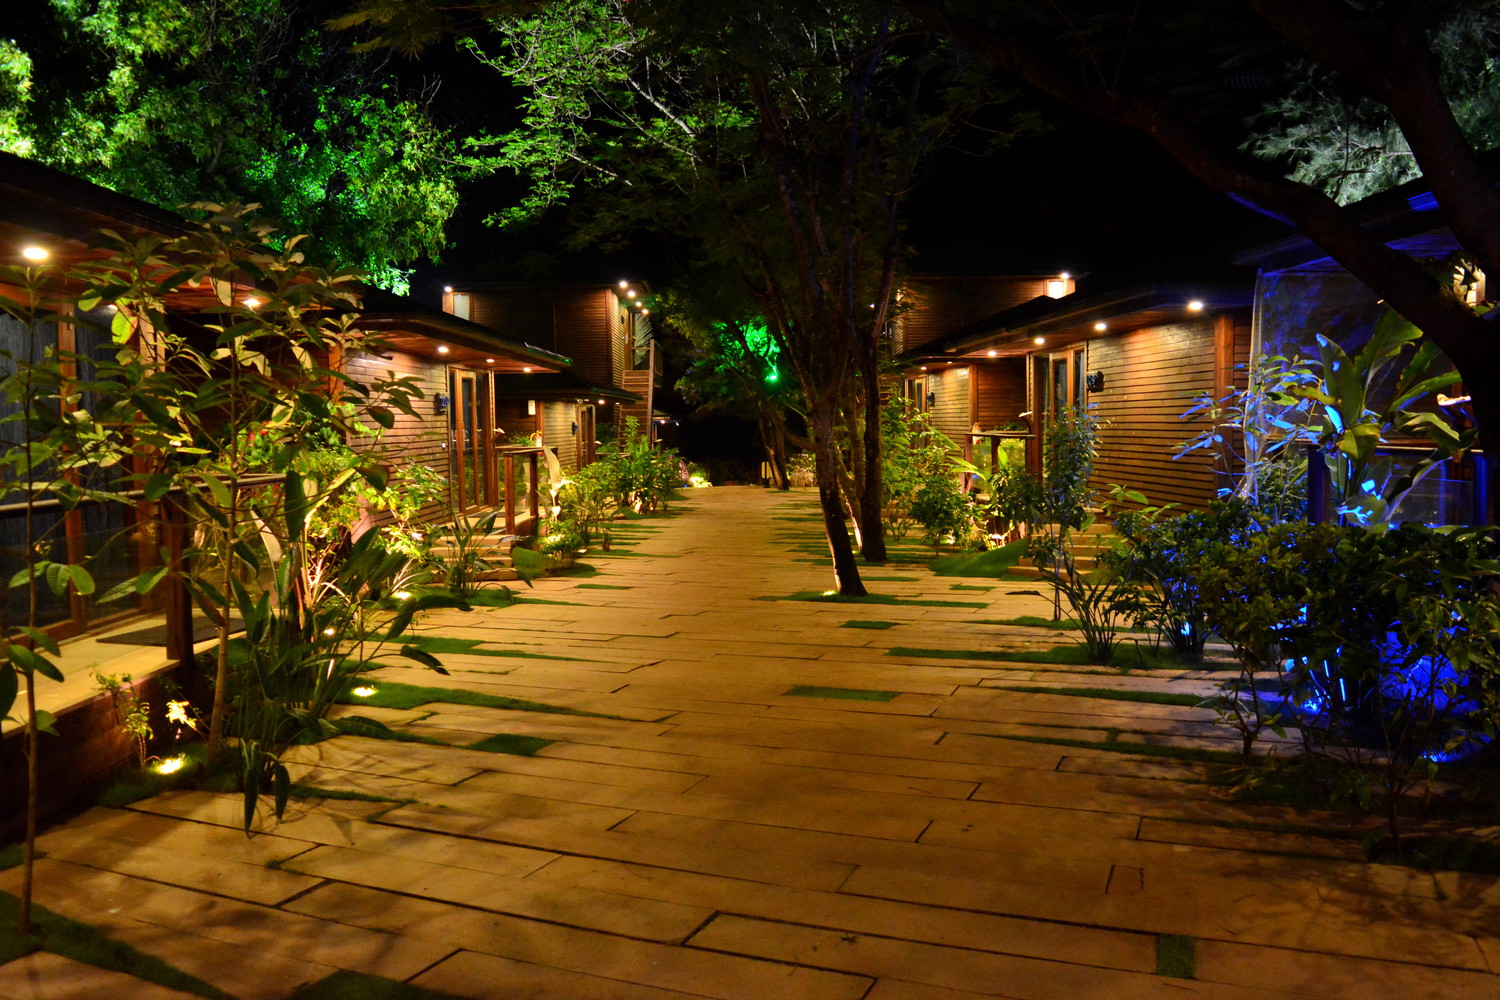 Two rows of wooden hotel rooms with a wooden pavement in between in a resort lit with orange lamps at night